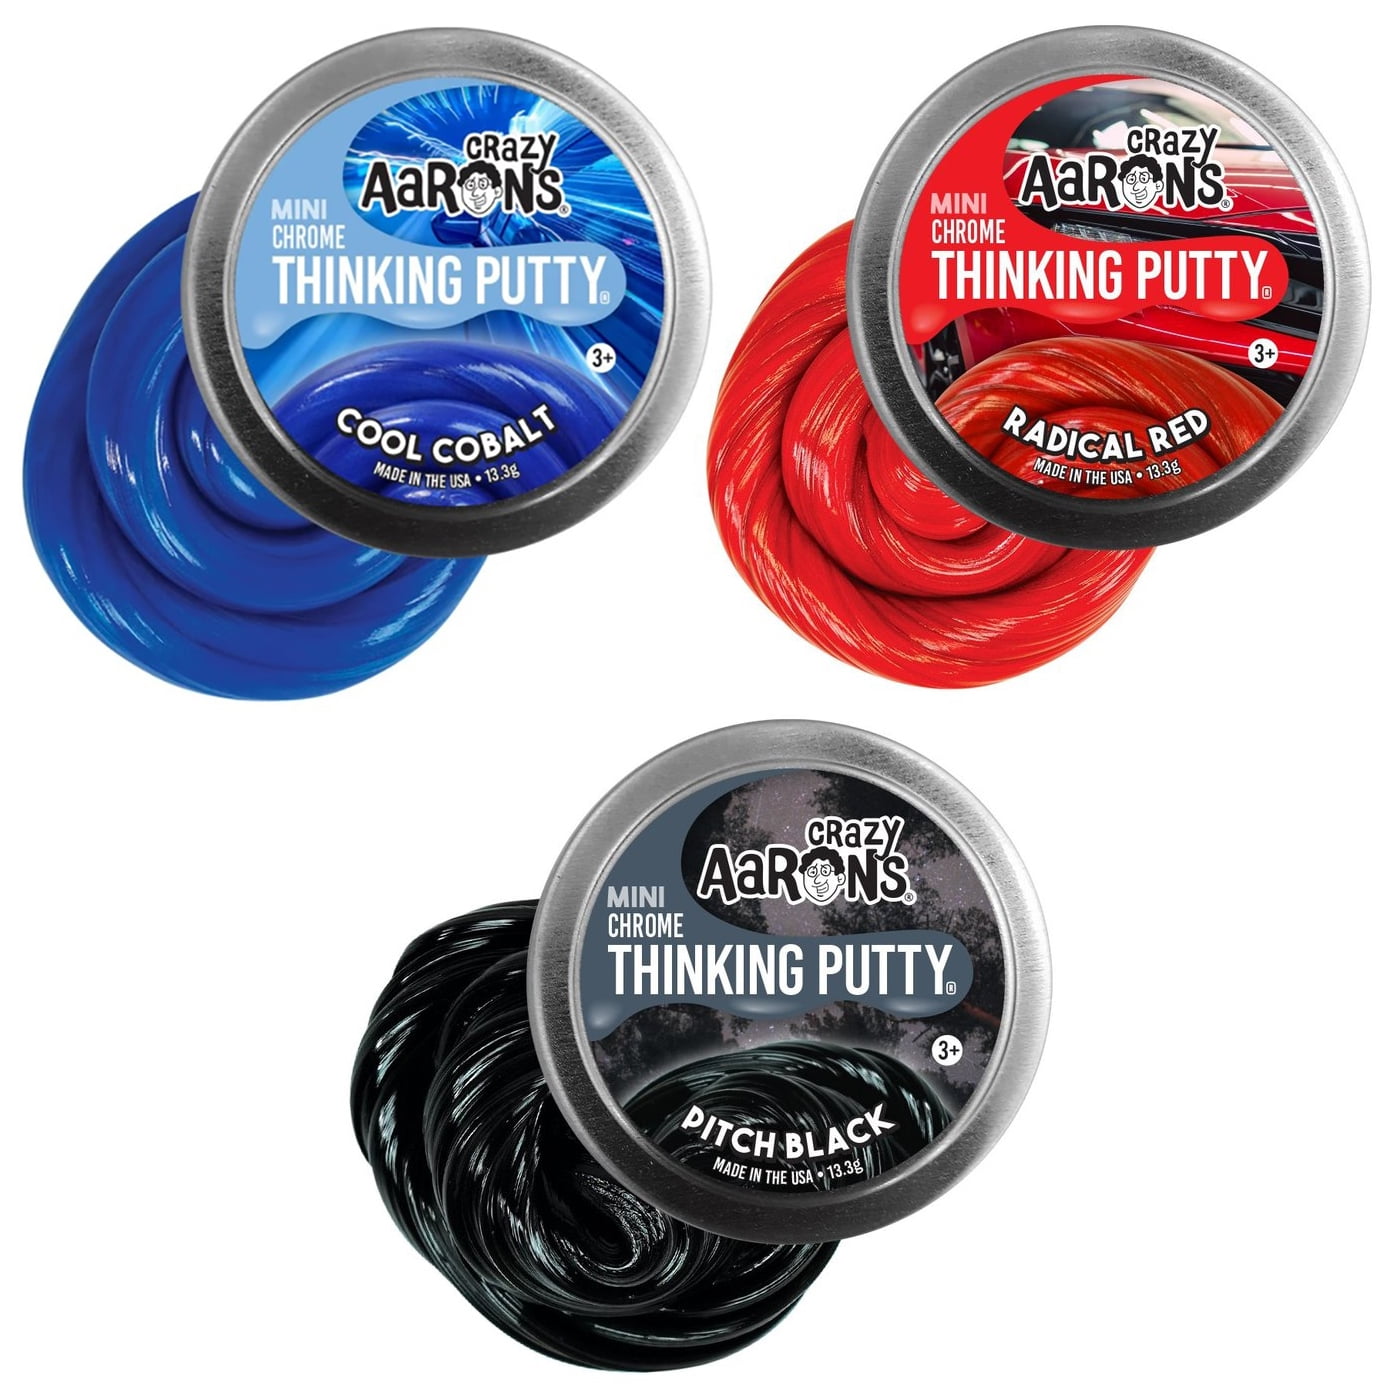 Crazy Aaron's Thinking Putty Bundle Set 6 PACK 2" tins Scarab Super fly Flash 